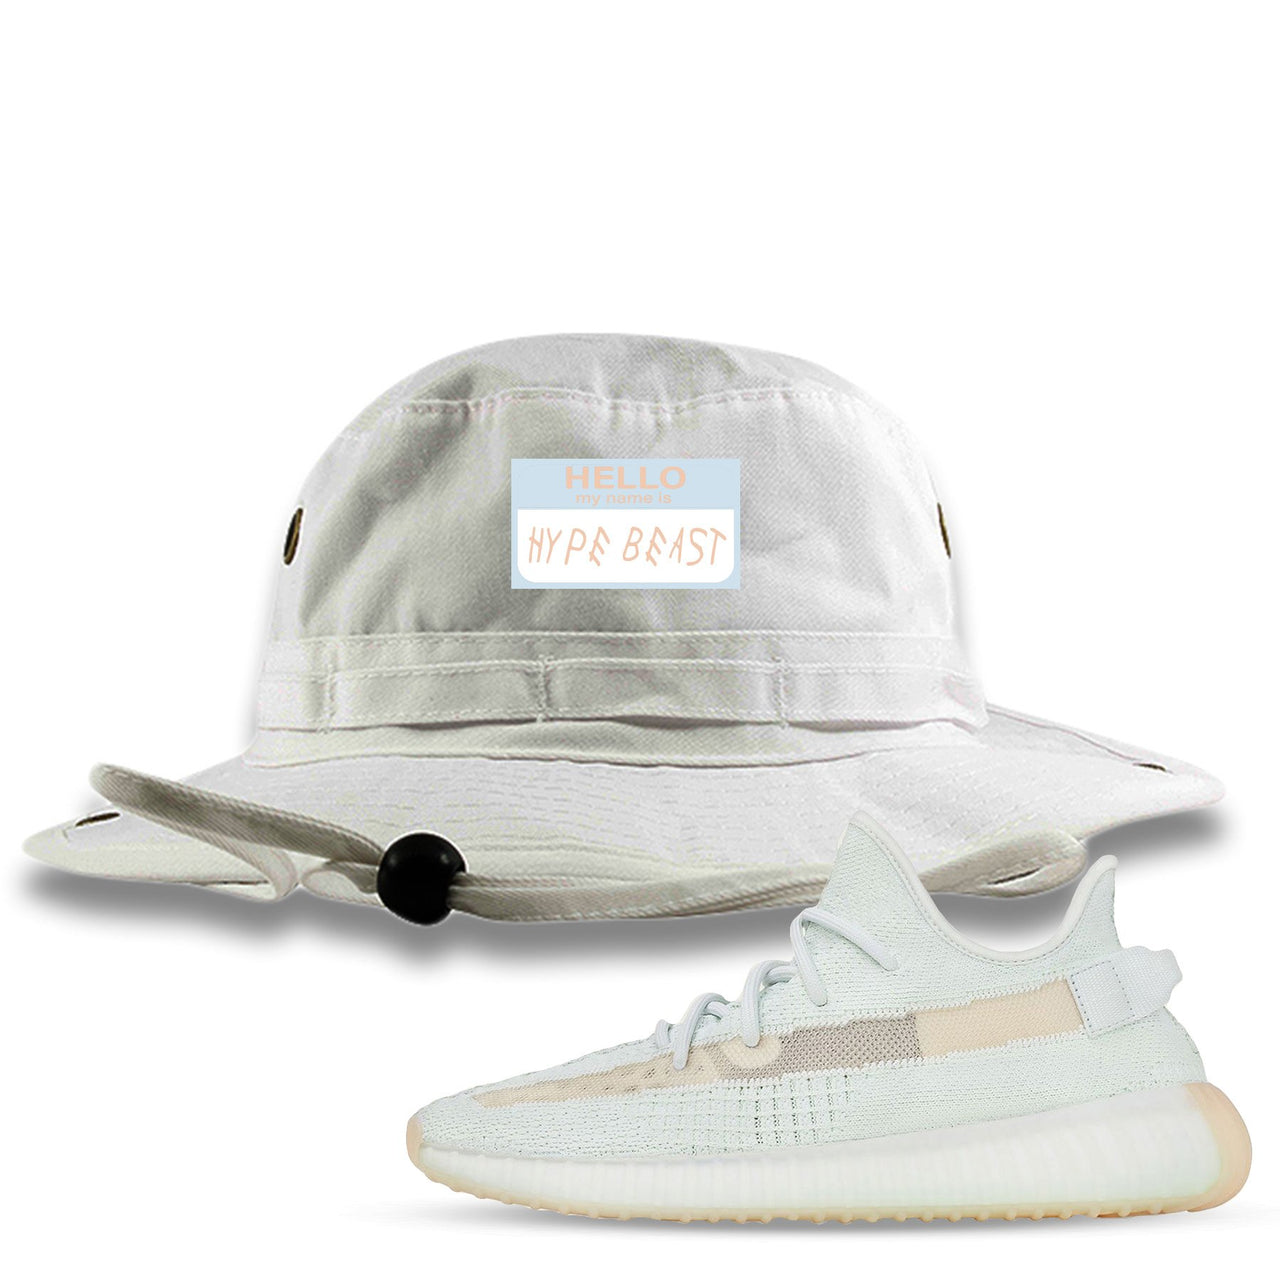 Hyperspace 350s Bucket Hat | Hello My Name Is Hype Beast Woe, White